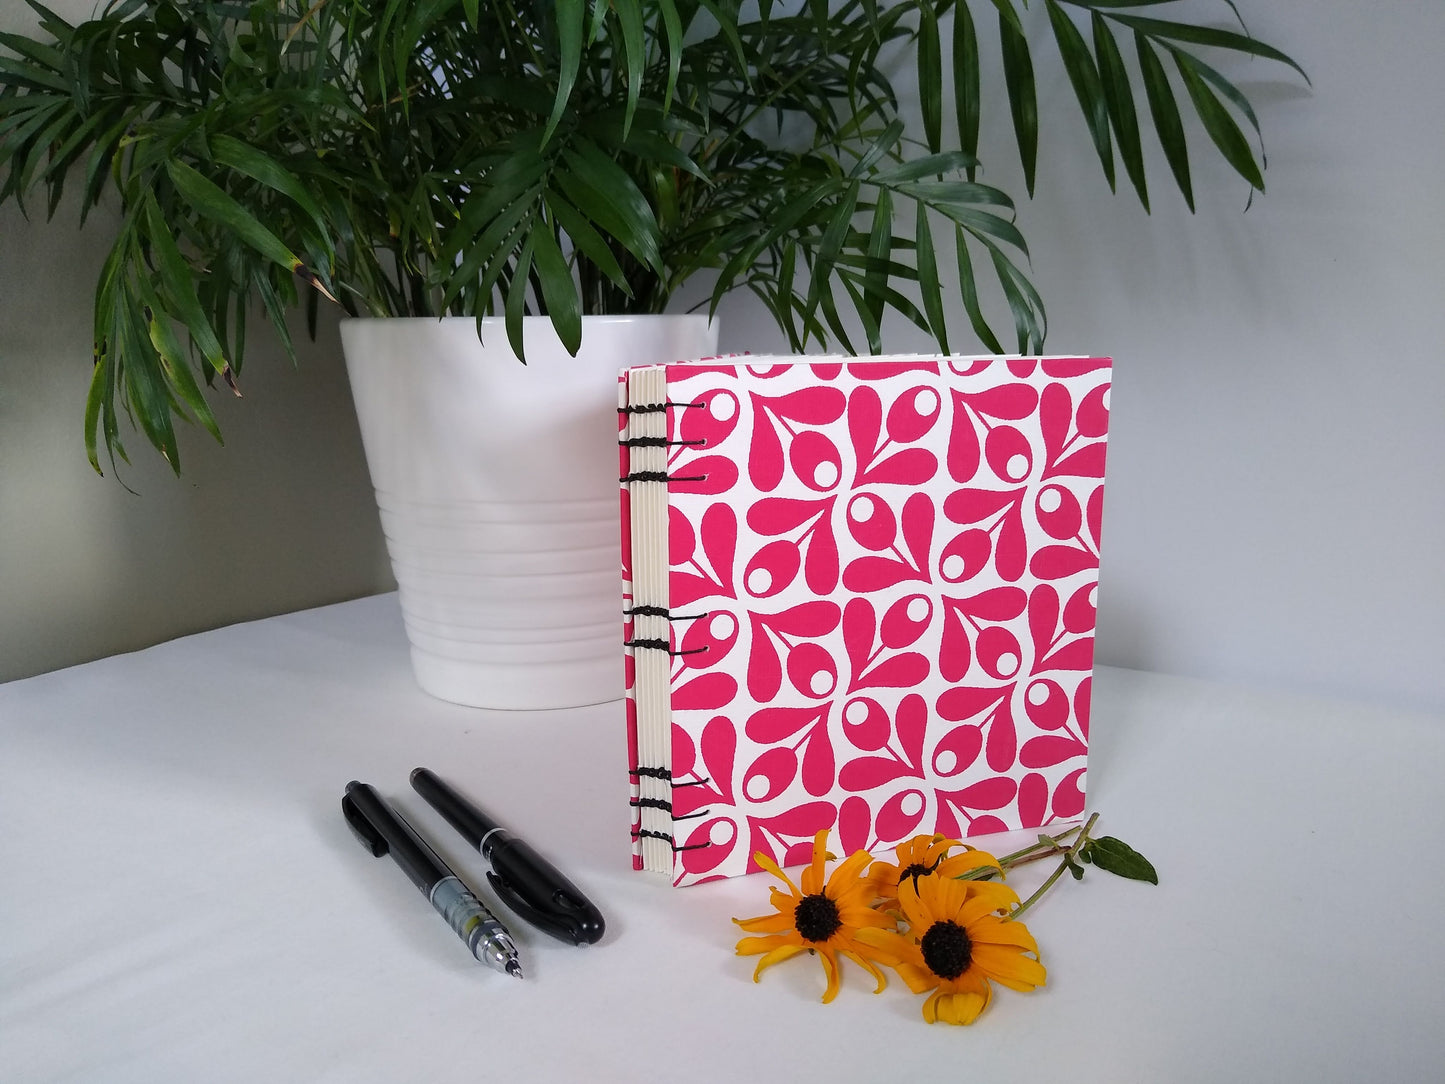 A handmade journal sits upright beside a potted plant, three yellow flowers, a black pen, and a black mechanical pencil. The cover of the journal is cream with red olive springs repeated across it. It's angled so the open spine is visible, along with the black stitching holding it together.